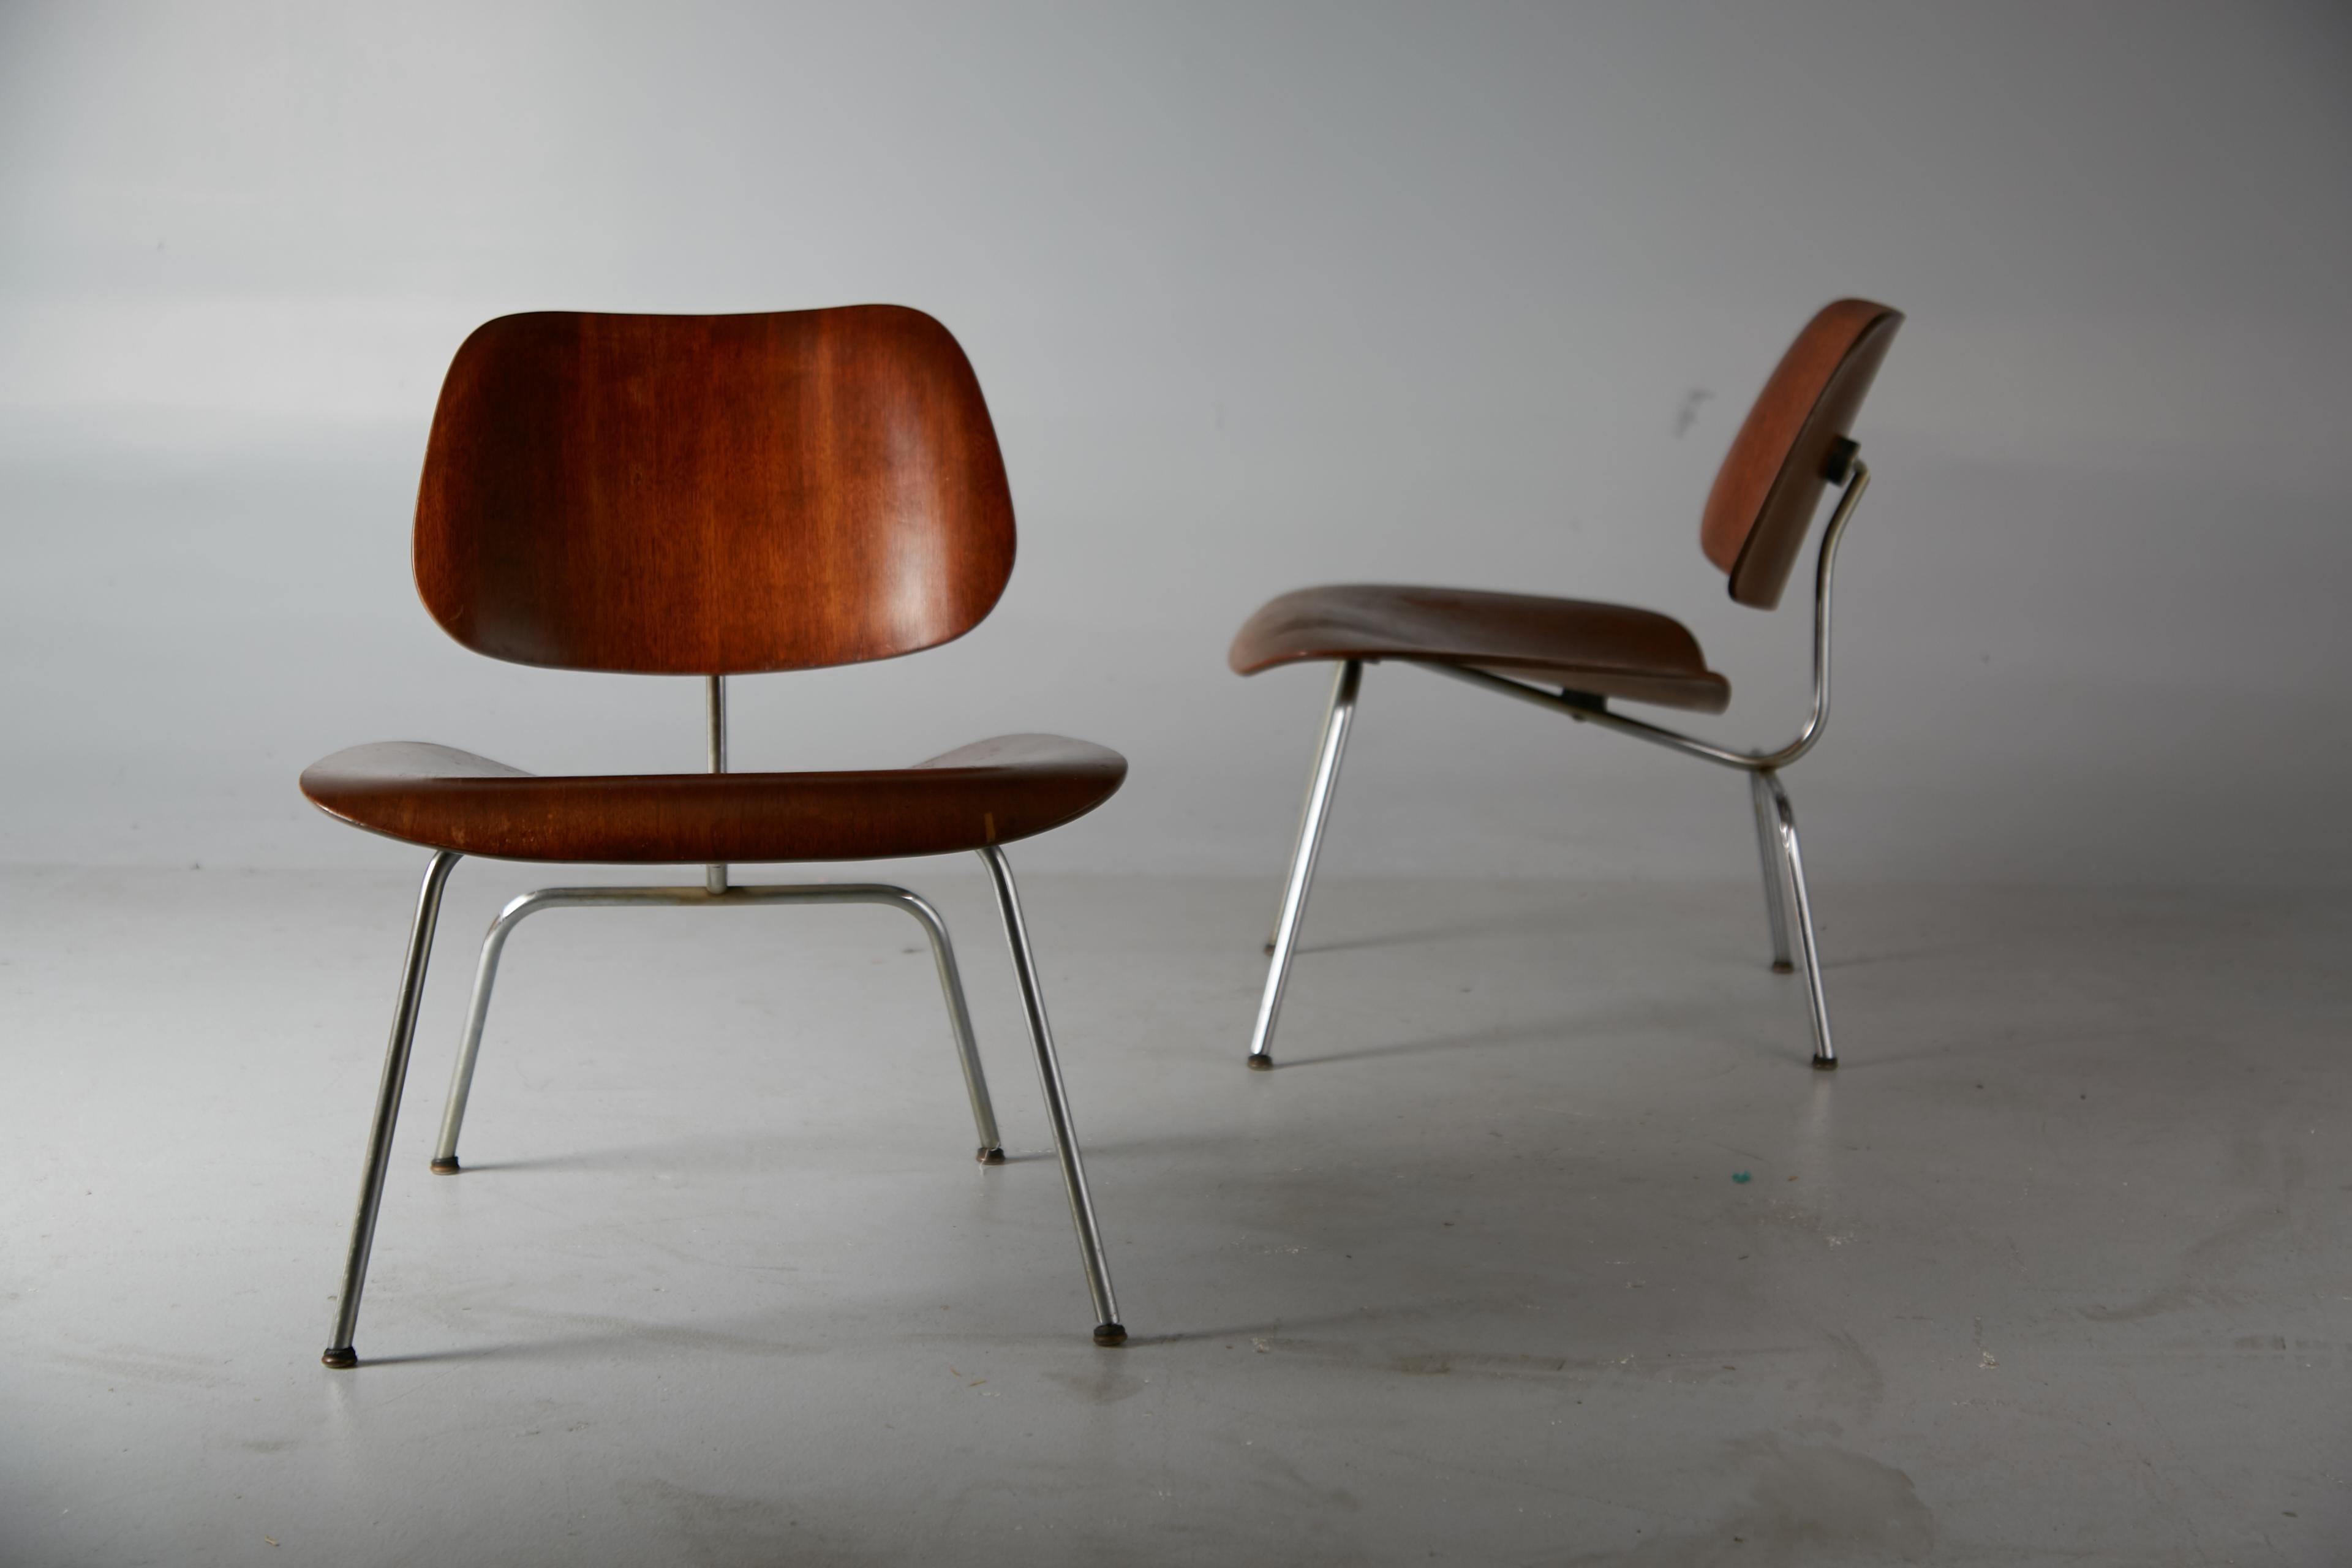 Plywood 1st Generation Evans Production Charles and Ray Eames LCM Chairs, 1946, Signed